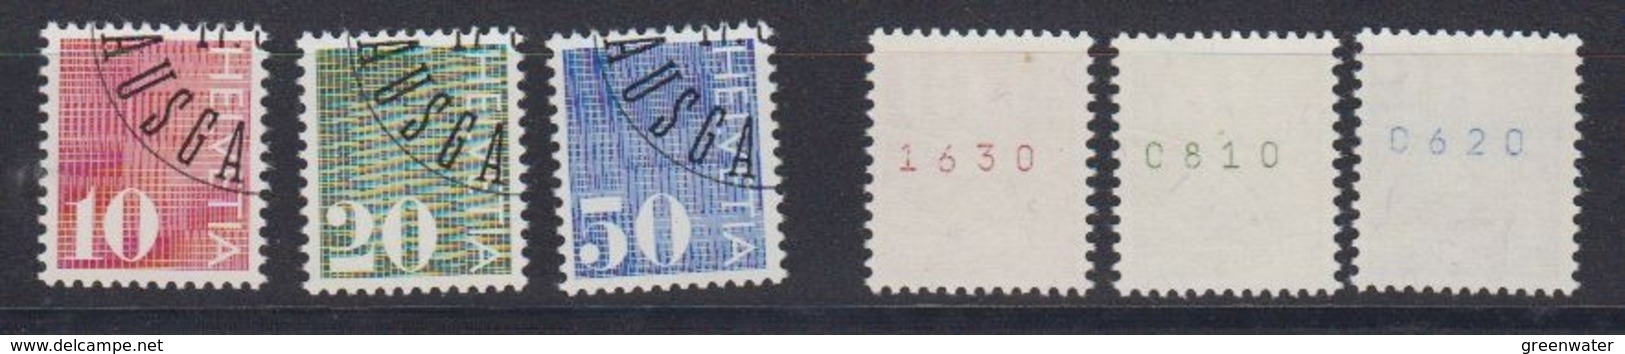 Switzerland 1970 Automatenmarken 3v Used 1st Day / With Number On Backside (44854A) - Rouleaux